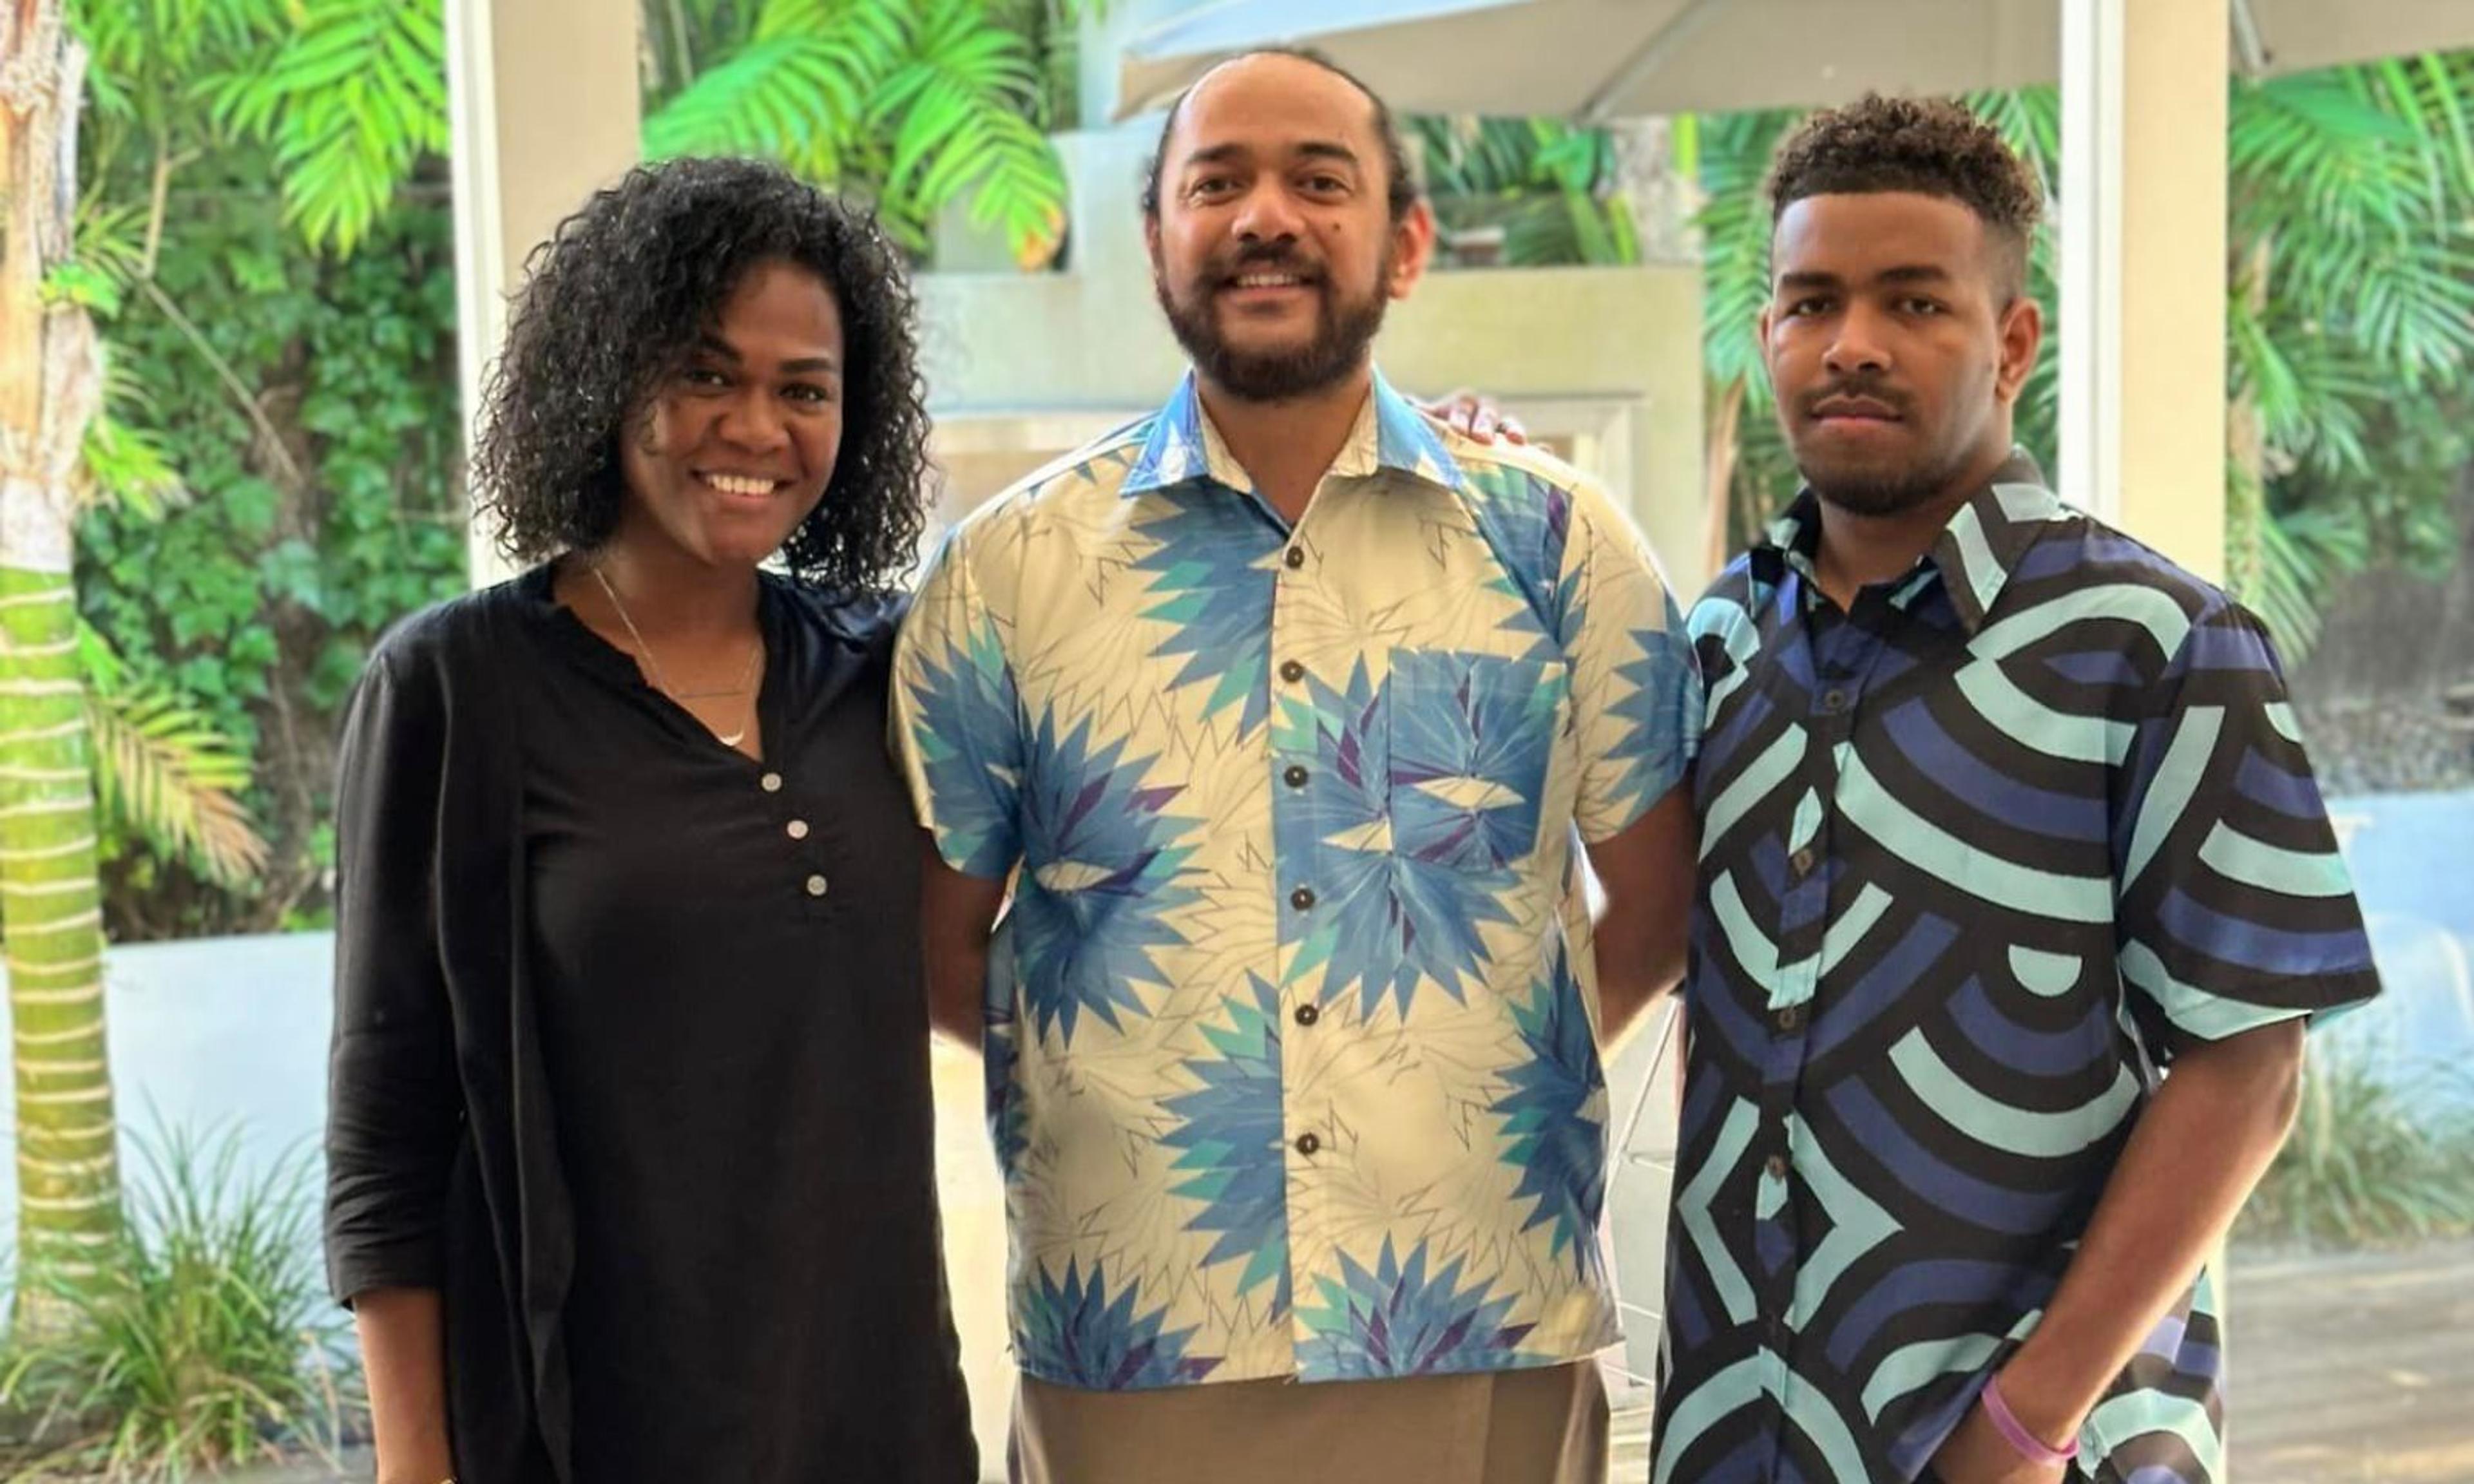 Three student fashion designers with the Wearing Fiji mentorship project on a week-long attachment in NZ, (L-R) Heather Vakosooso, Aisea Solomone, and Ledua Daurewa. They want a fashion school established in Fiji to help foster rising fashionistas.